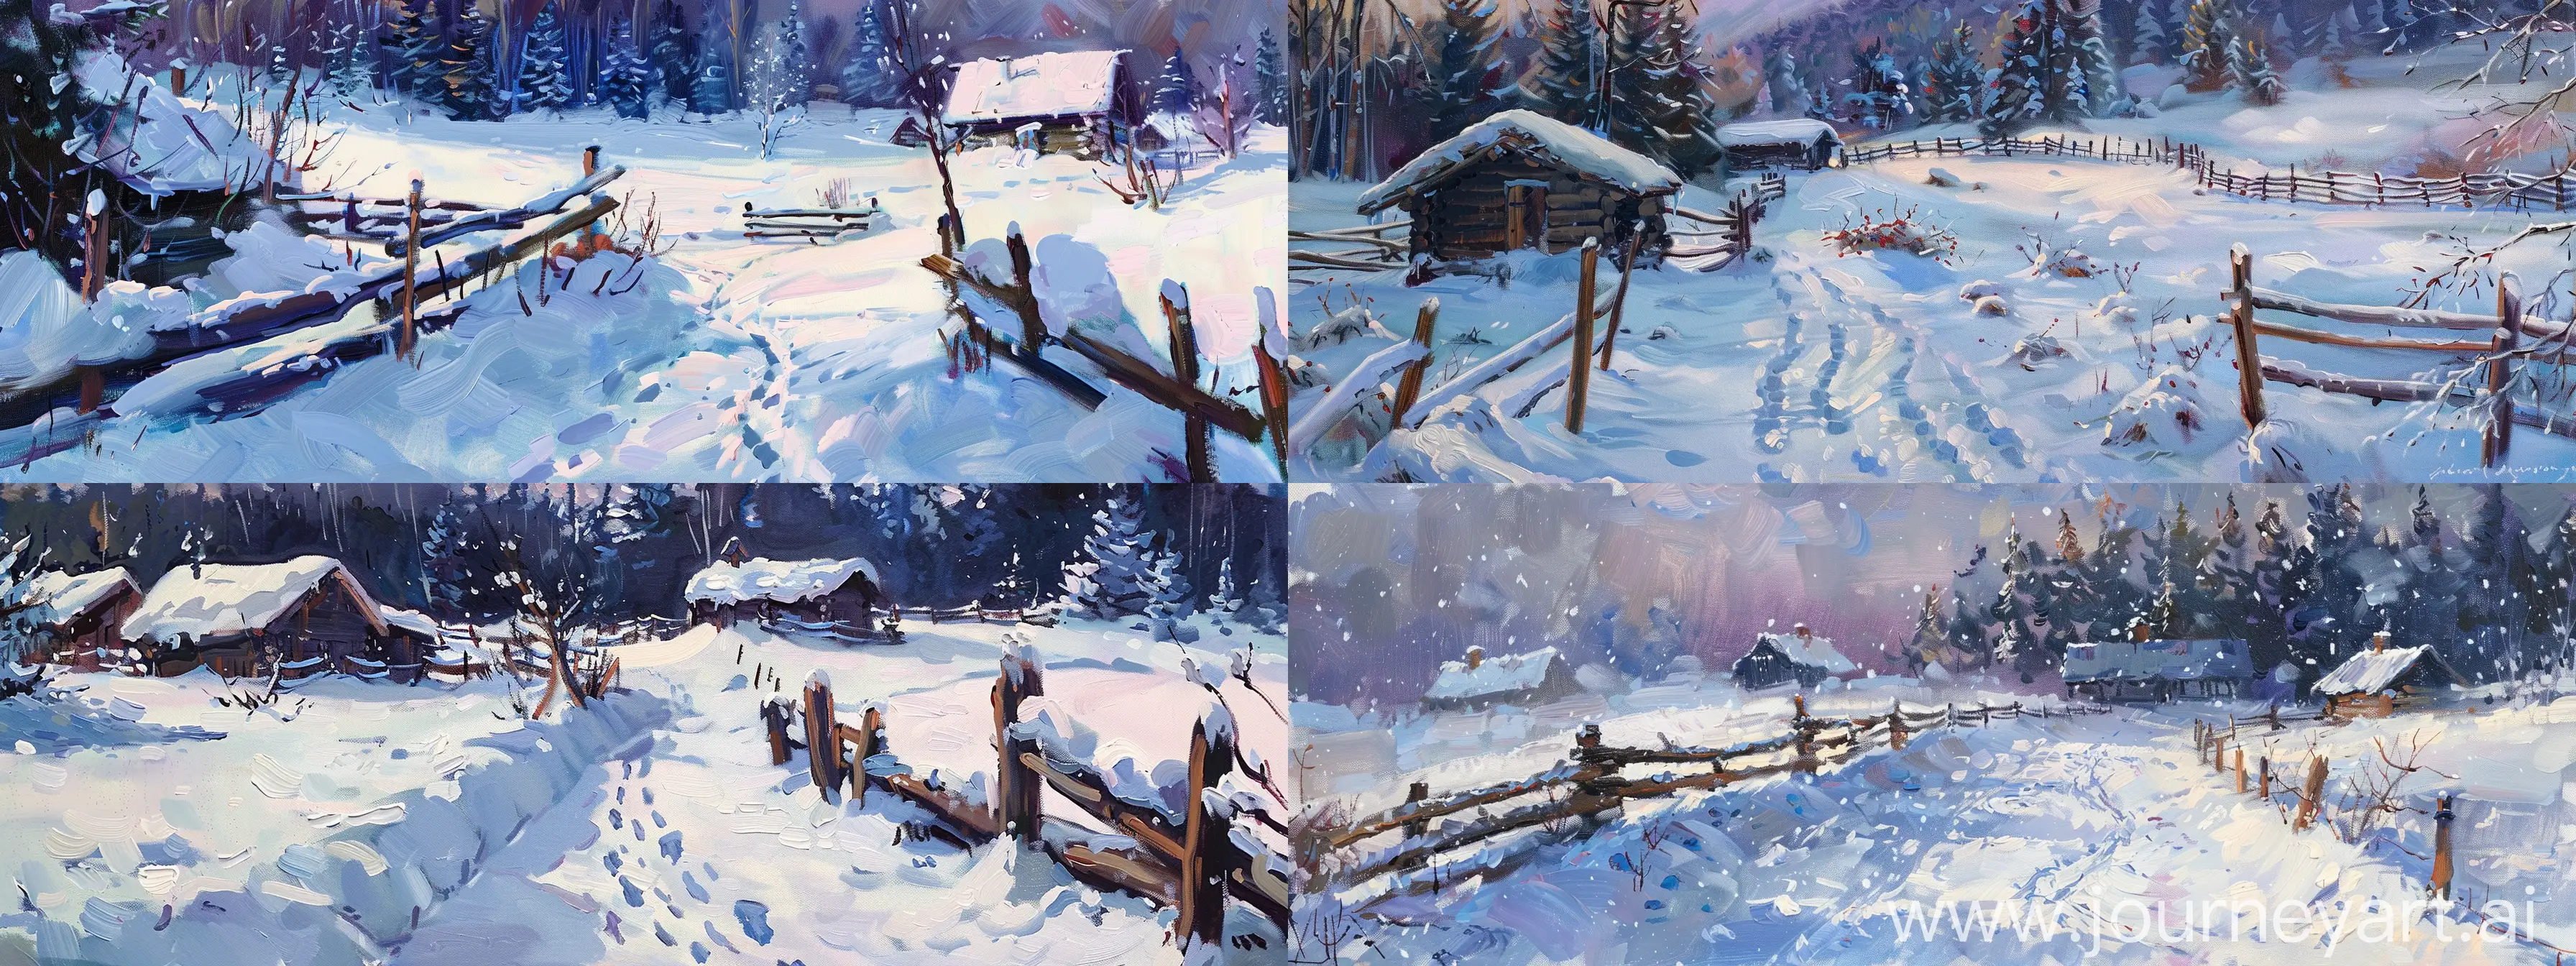 The oil painting depicts a serene winter landscape with a thick blanket of snow covering the ground and rooftops. The scene includes a wooden fence, footprints leading to wooden chalets, and a forest in the background. The colors used are various shades of white and blue for the snow, dark brown for the wooden elements, dark green for the trees, and pale blue with hints of purple and pink for the sky.
Create a serene winter landscape painting featuring a snowy scene with wooden fences, footprints leading to wooden chalets, and a dense coniferous forest in the background. Use shades of white, blue, dark brown, dark green, and pale blue with hints of purple and pink to capture the essence of a peaceful winter day. Pay attention to details like snow textures, wooden structures, and tree branches laden with snow --ar 16:6 --c 3